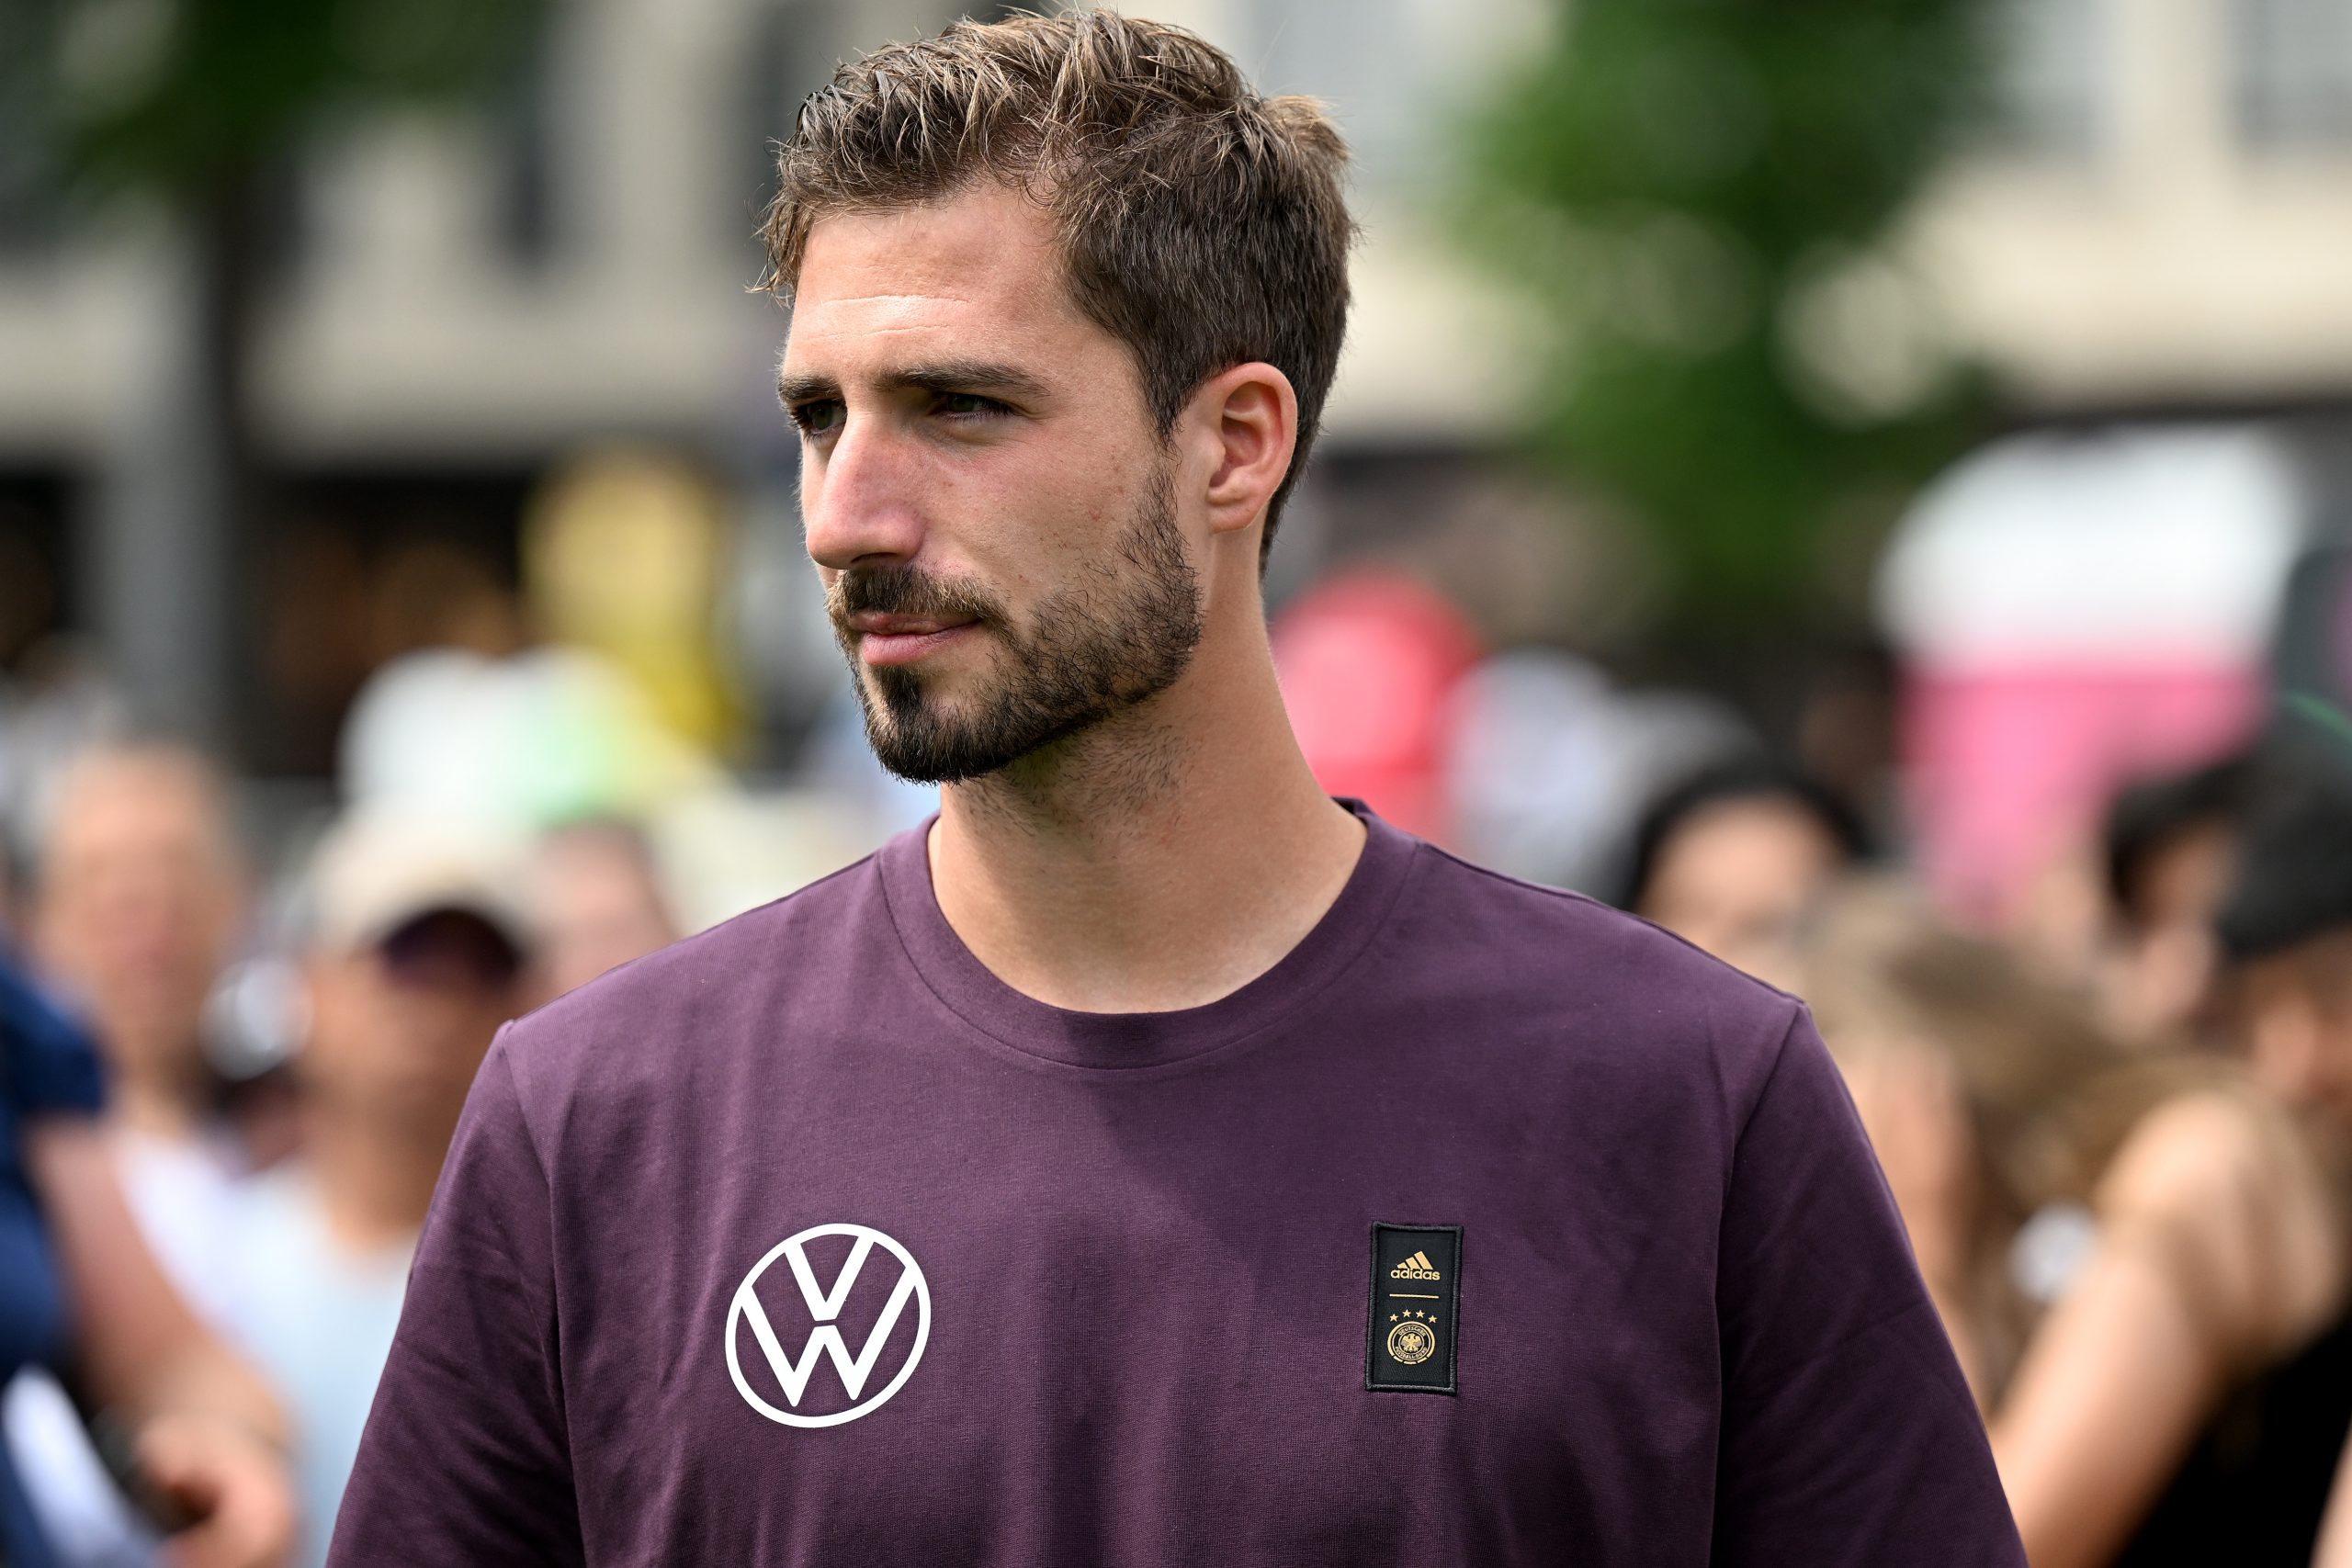 Kevin Trapp of Germany.